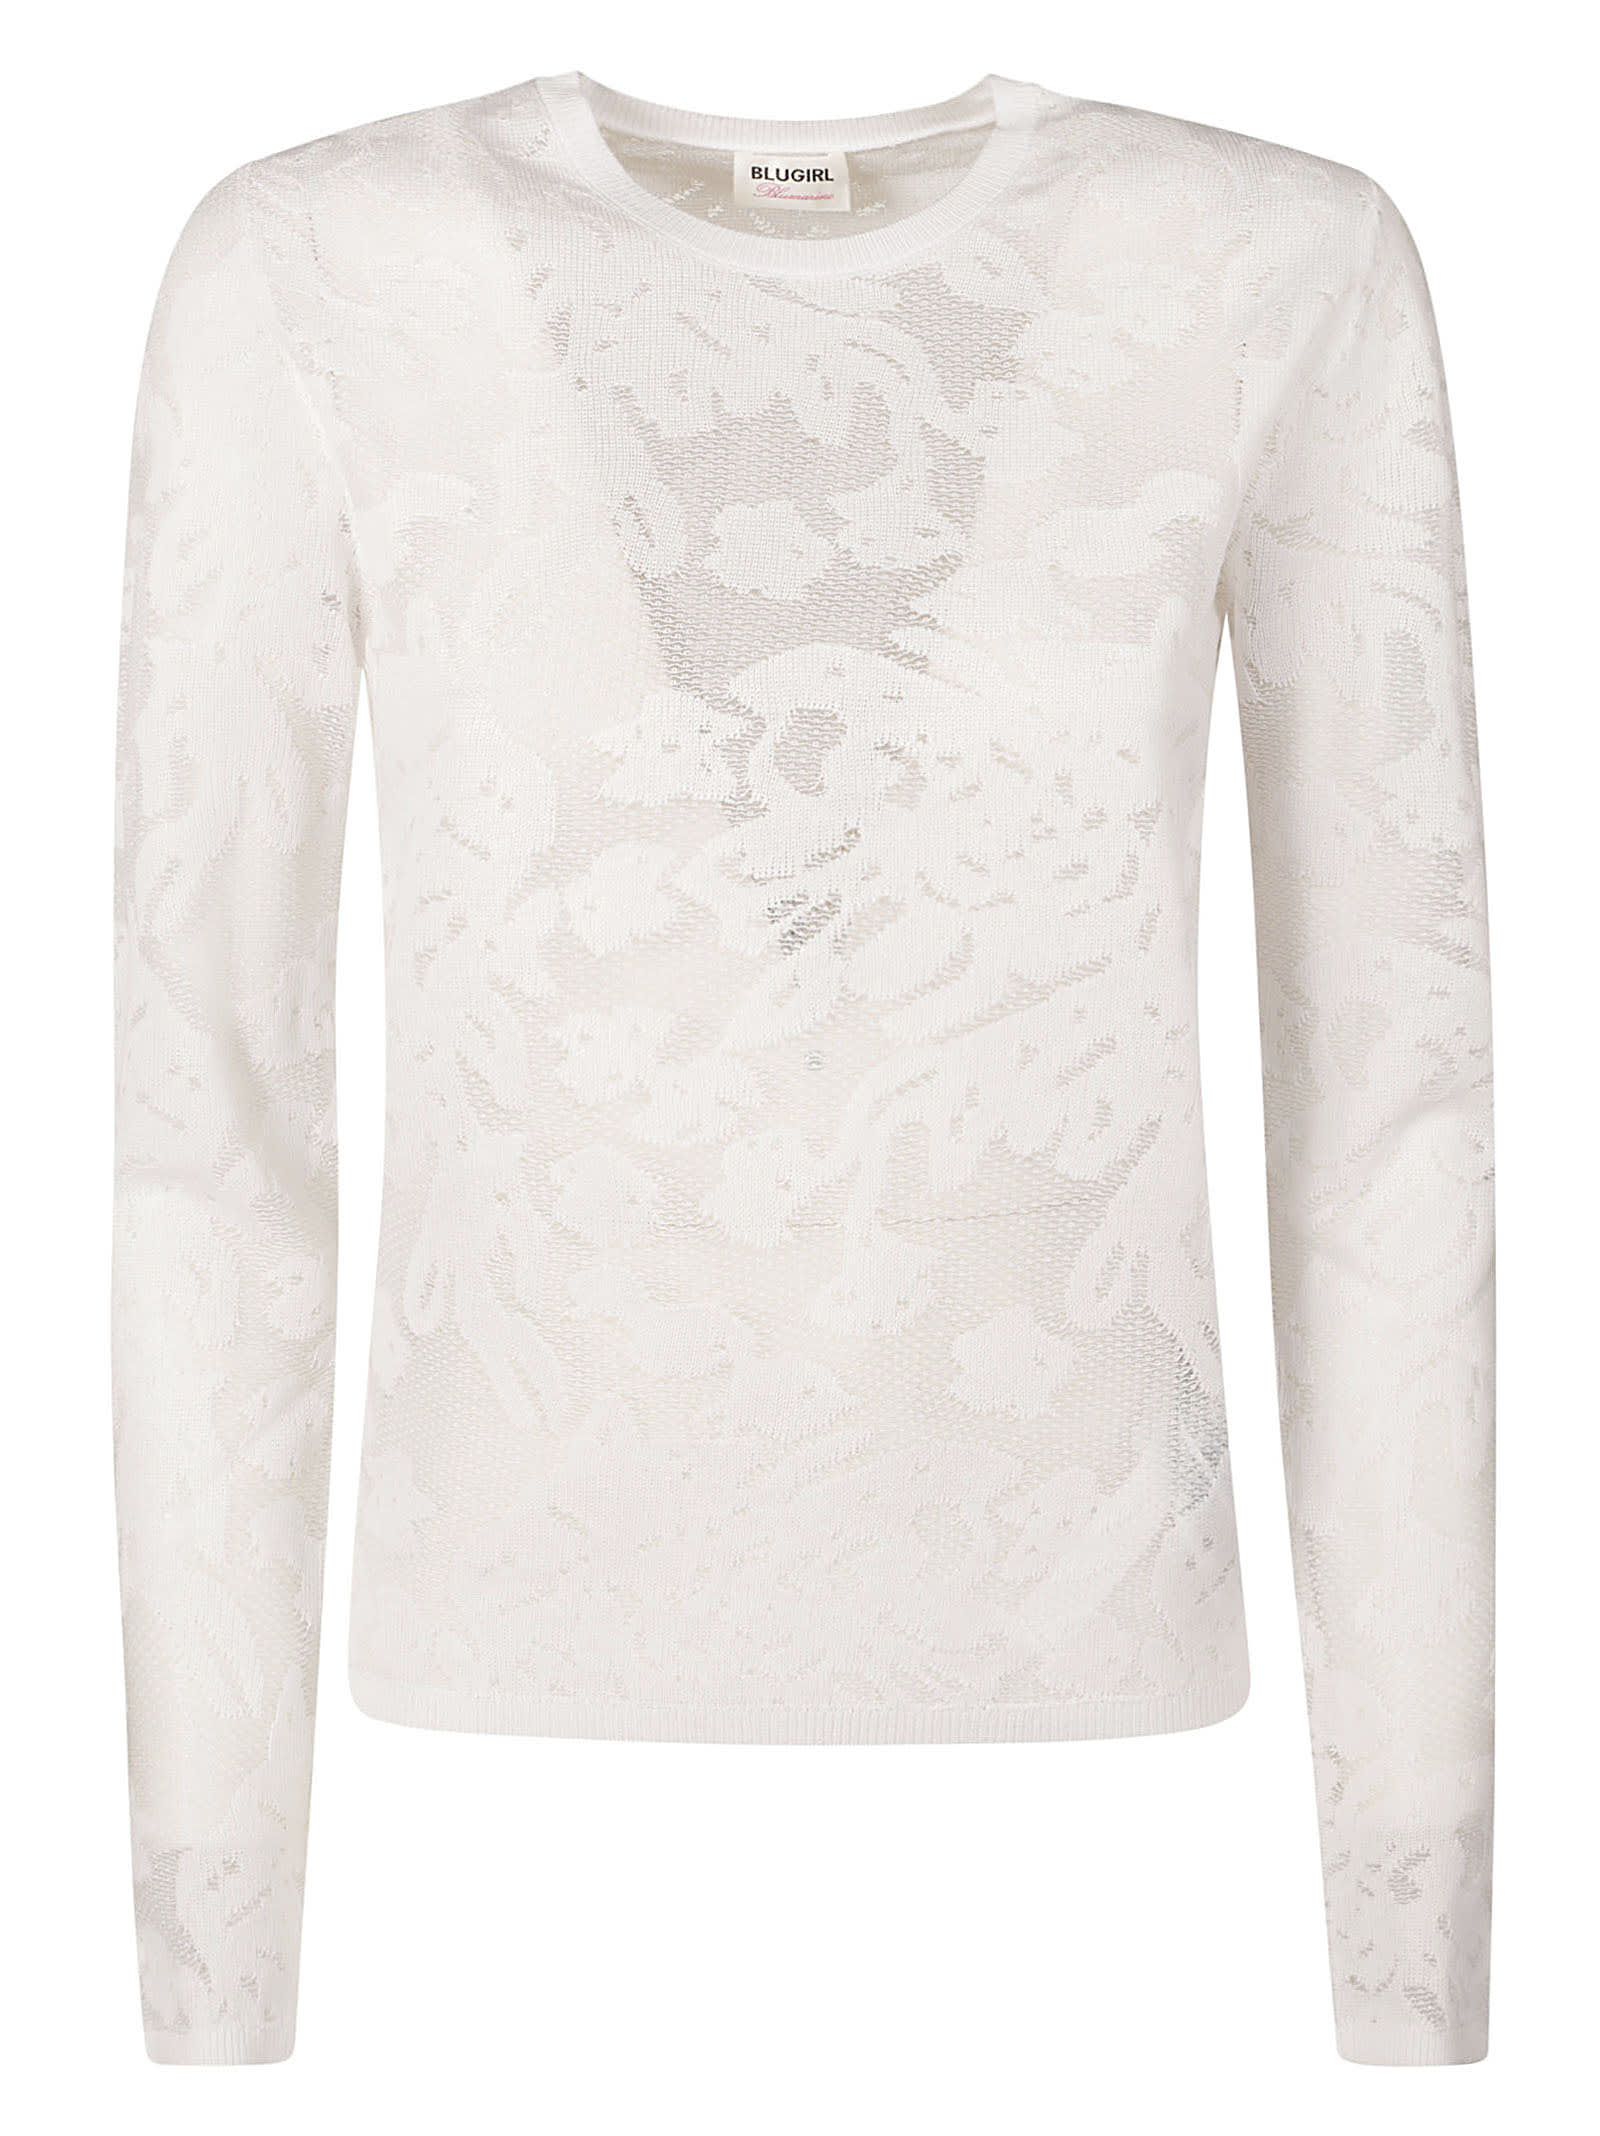 BLUGIRL LONG-SLEEVED FLORAL LACE TOP